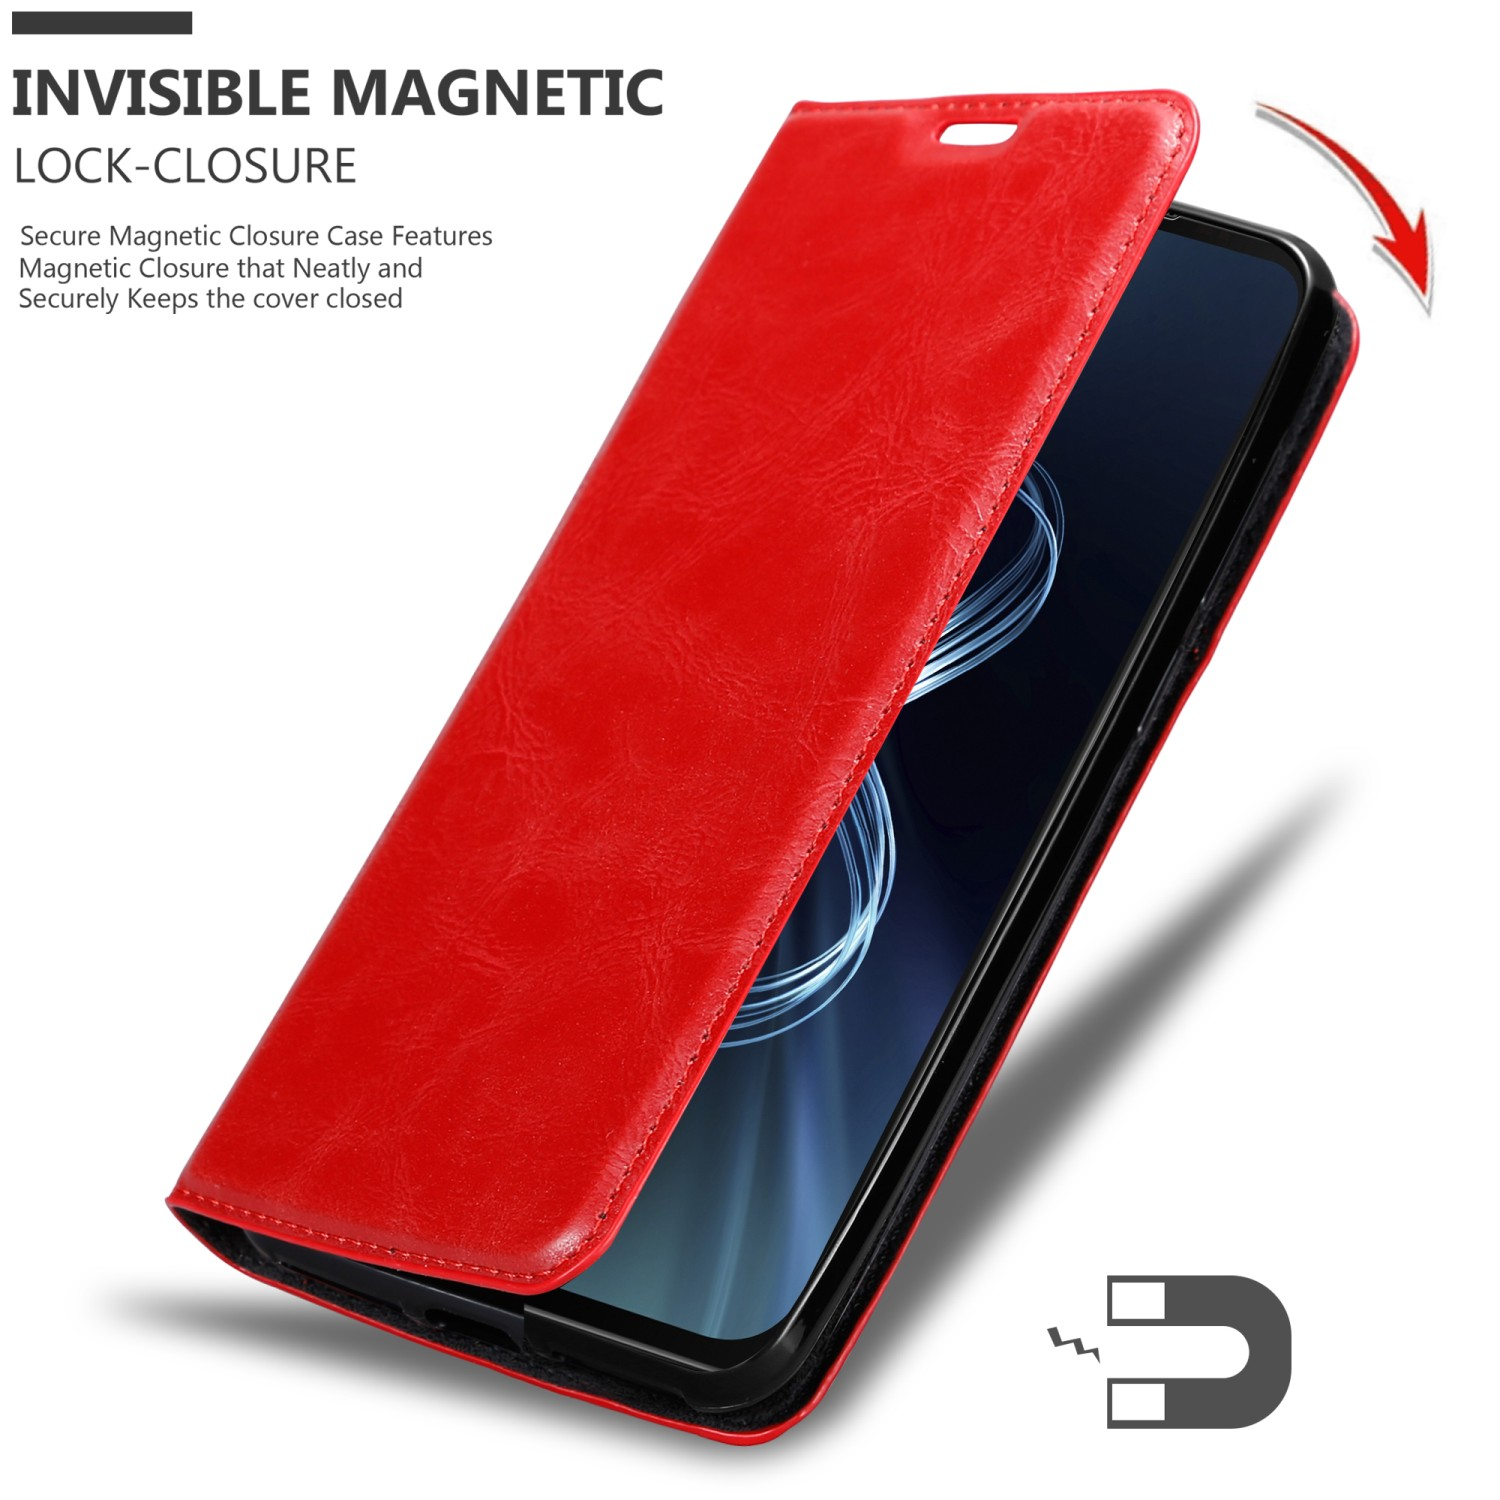 APFEL Hülle Invisible Book Magnet, Asus, ZenFone Bookcover, CADORABO 8, ROT